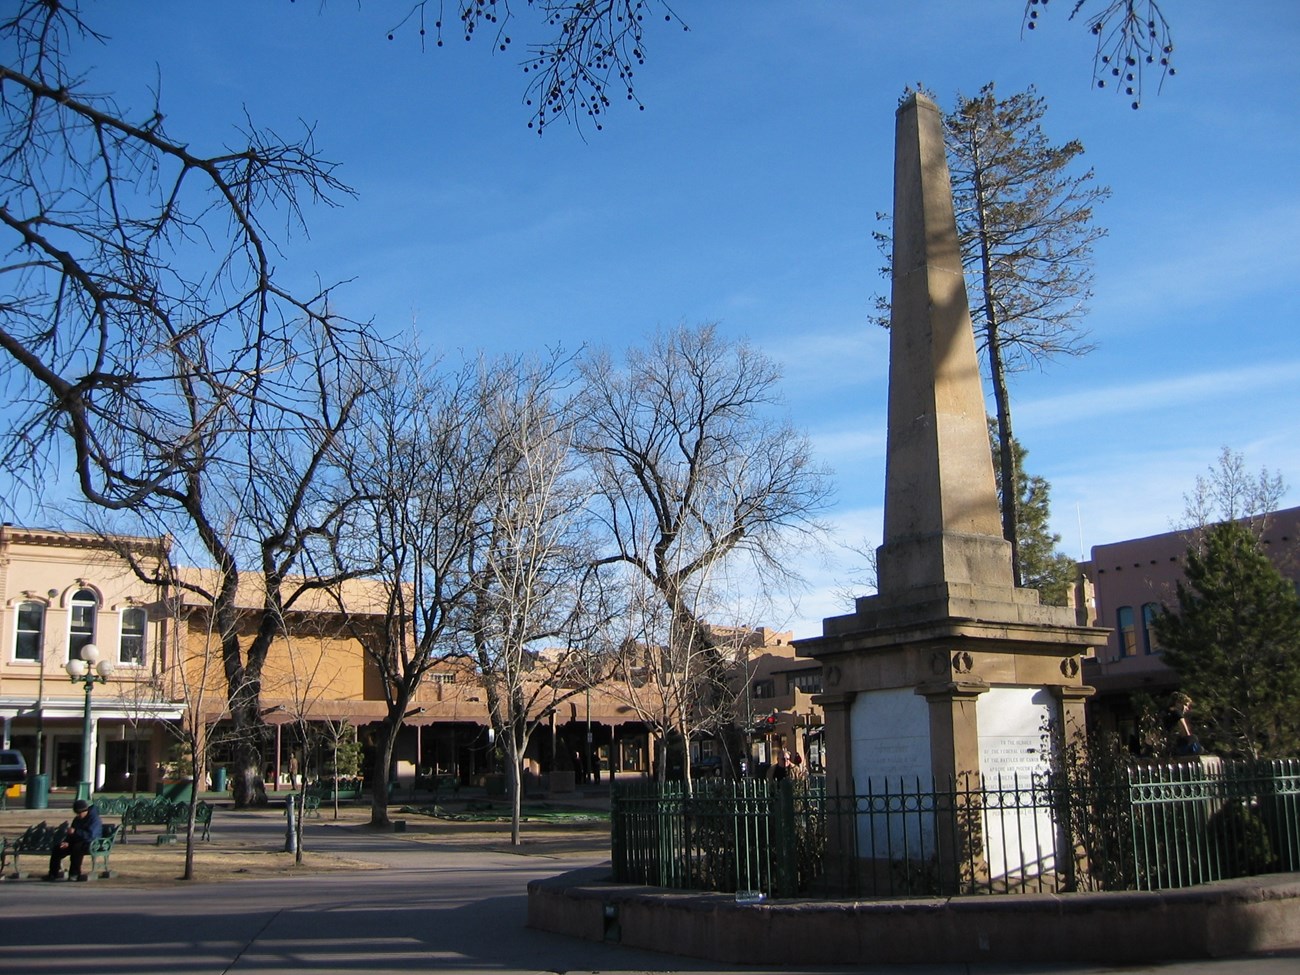 Image of Santa Fe Plaza monument, which is an obelisk